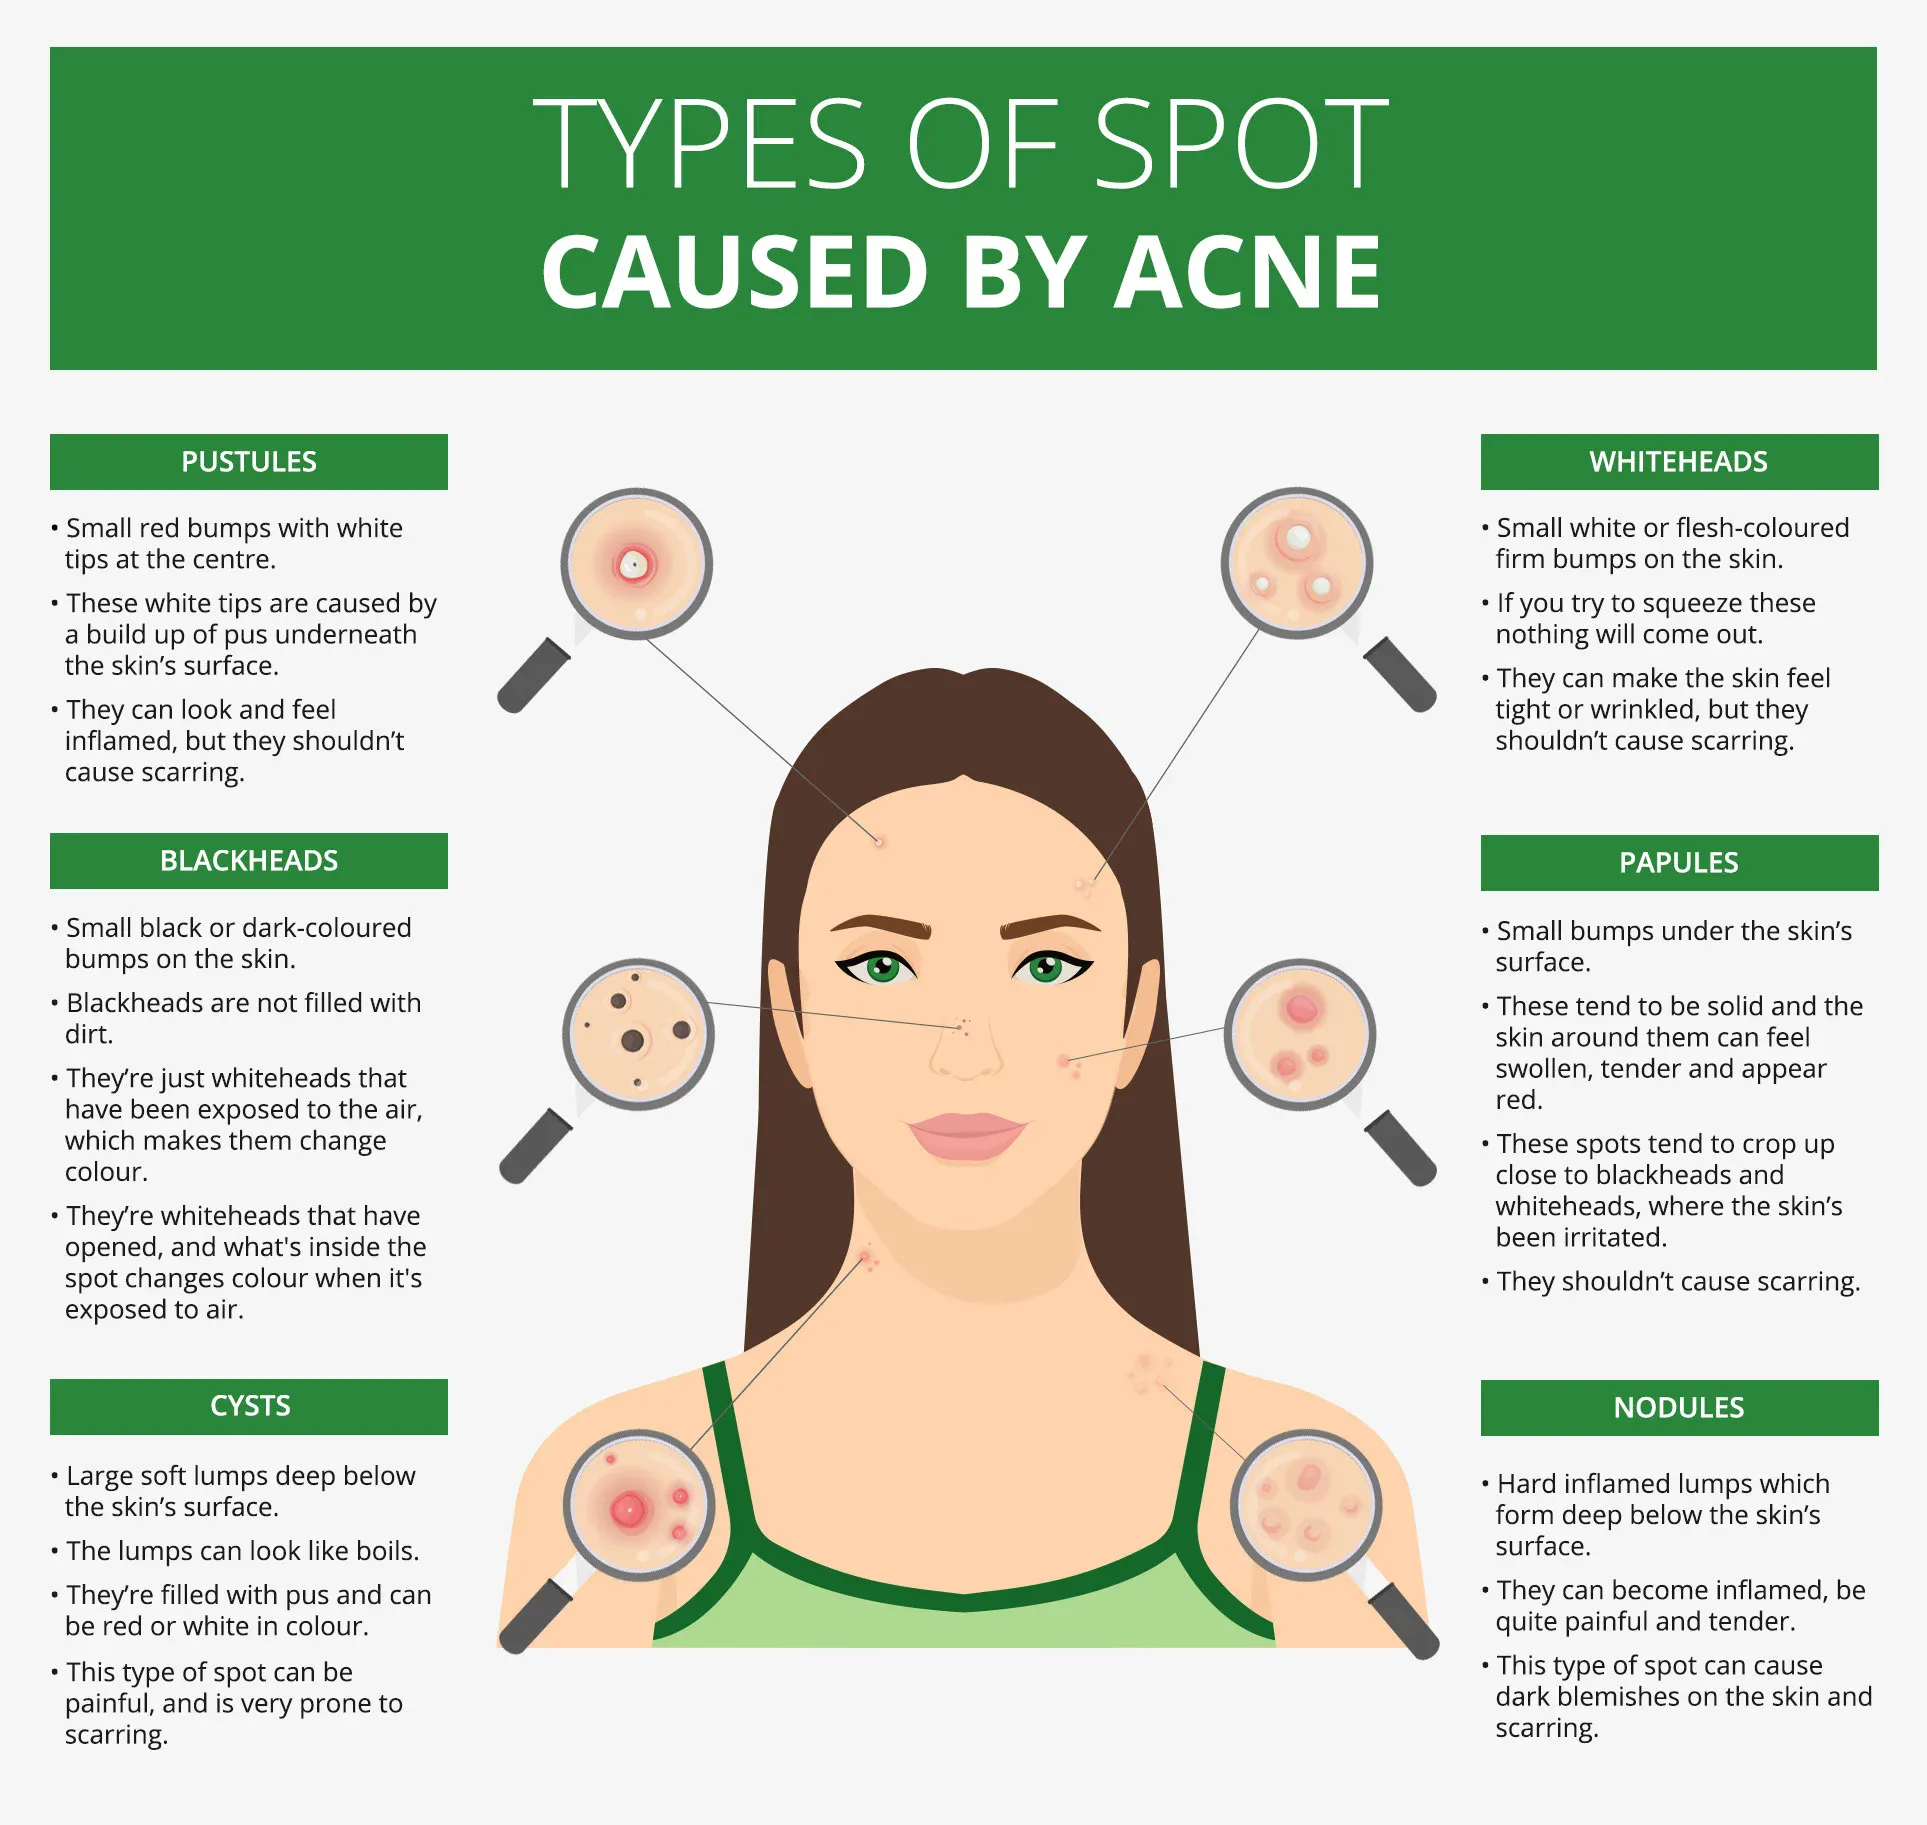 Different types of spot caused by acne